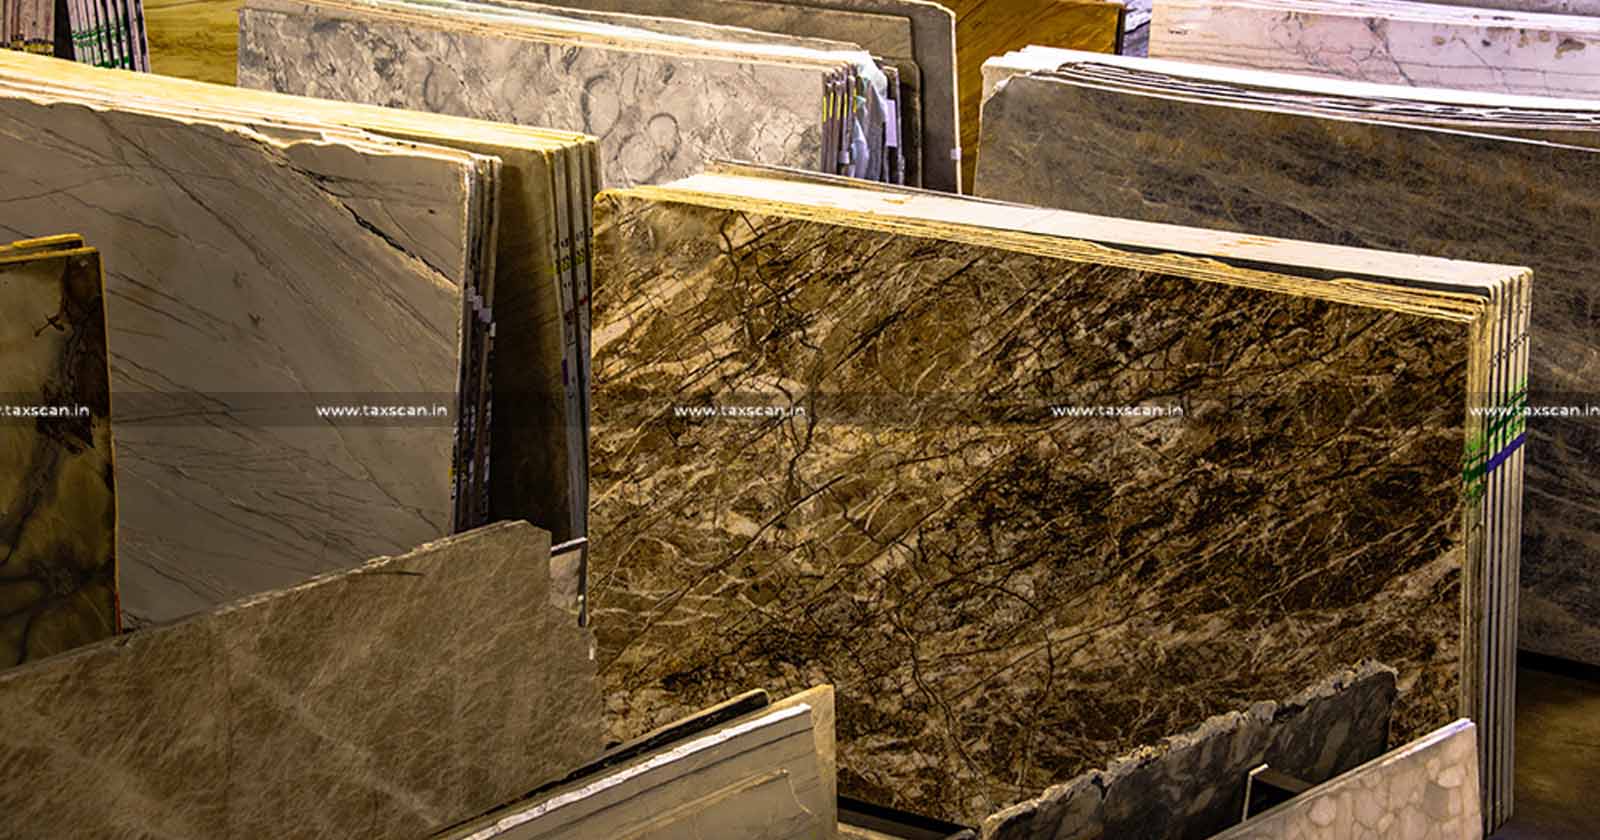 Independent Manufacturer liable to pay Excise Duty - Marble Slabs Manufactured on Job Work Basis - CESTAT directs Re-adjudication - CESTAT - Re-adjudication - Excise Duty - Manufacturer - Taxscan